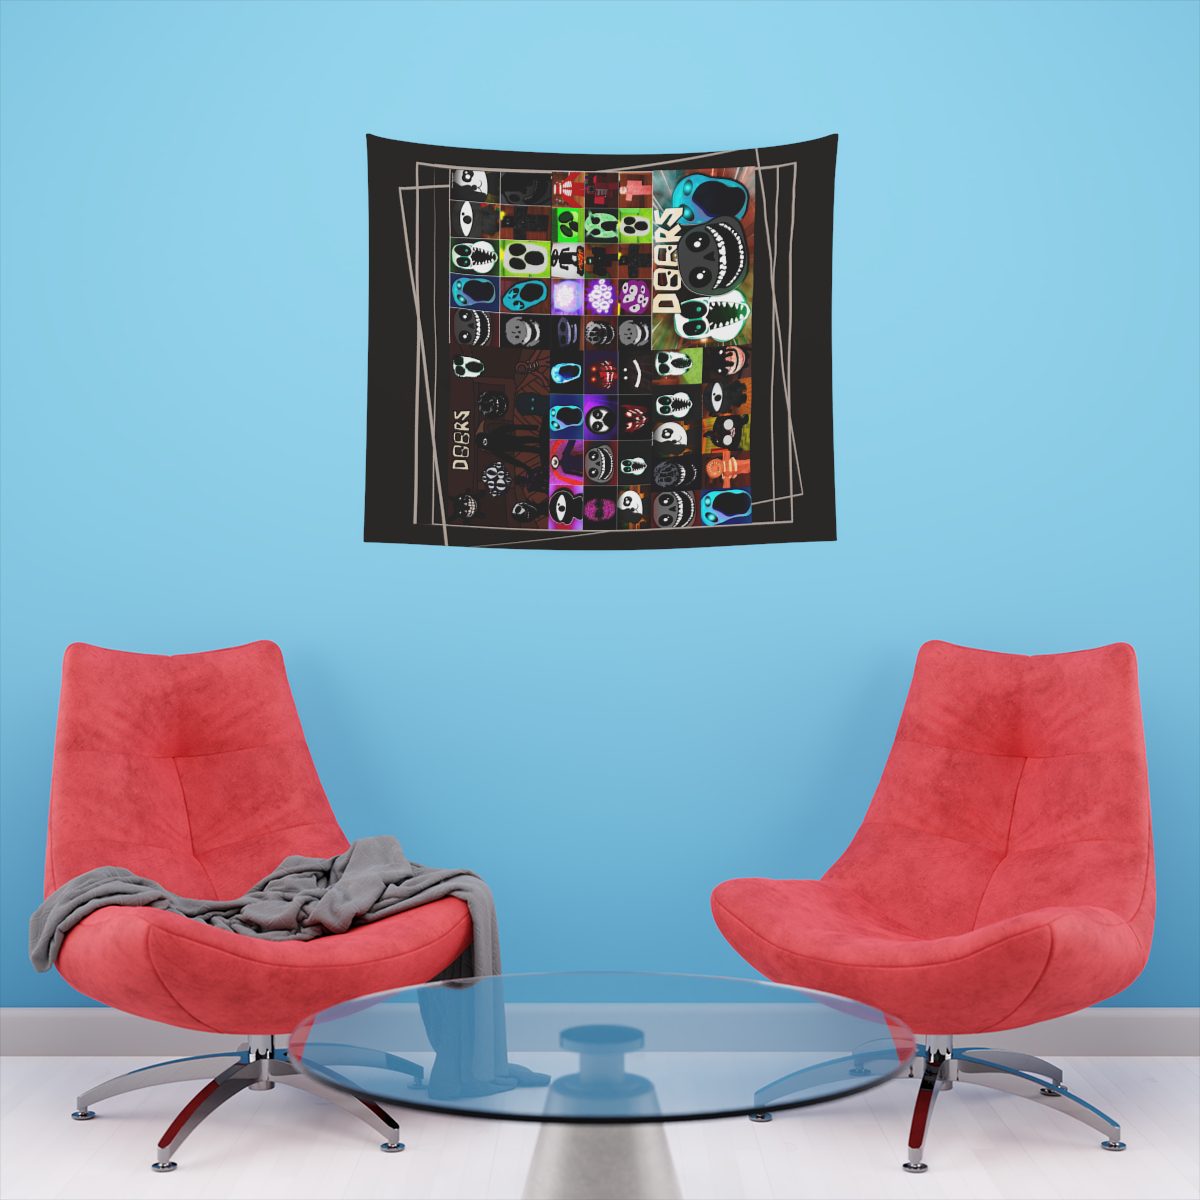 Invite your friends to a terrifying Halloween party with the DOOR ROBLOX horror tapestries.  Printed Wall Tapestry Cool Kiddo 16